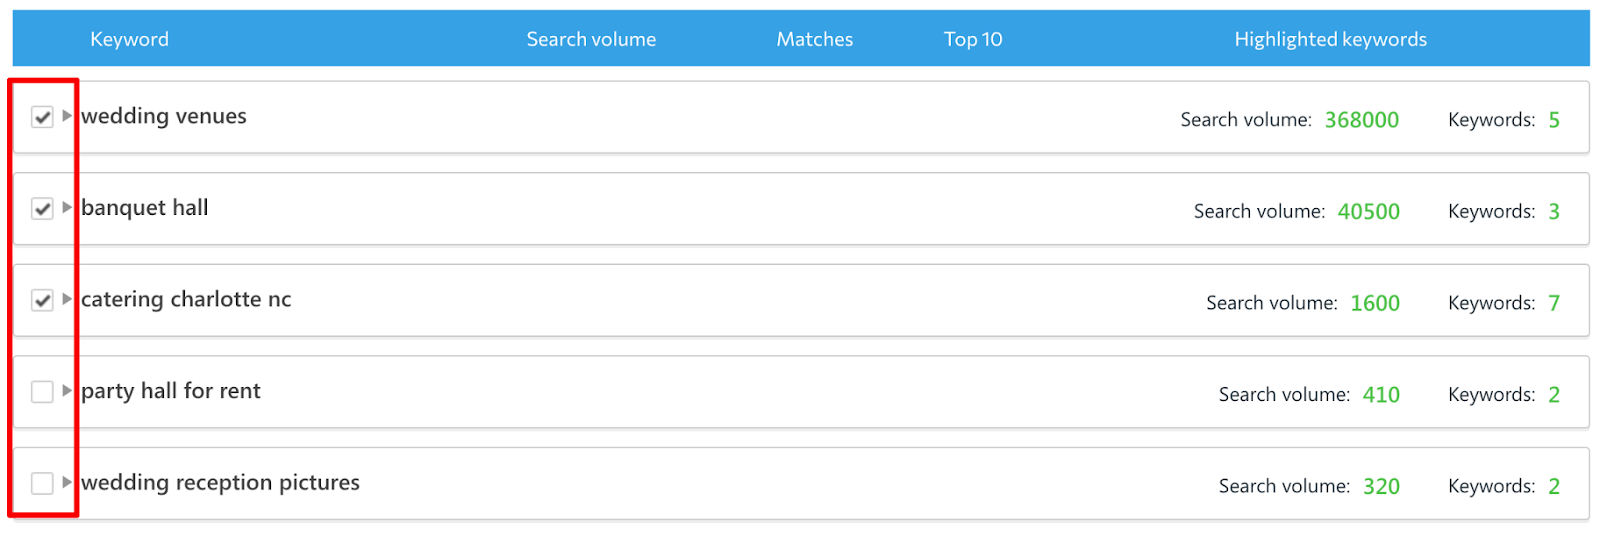 Example of sorted keyword groups in SE Ranking